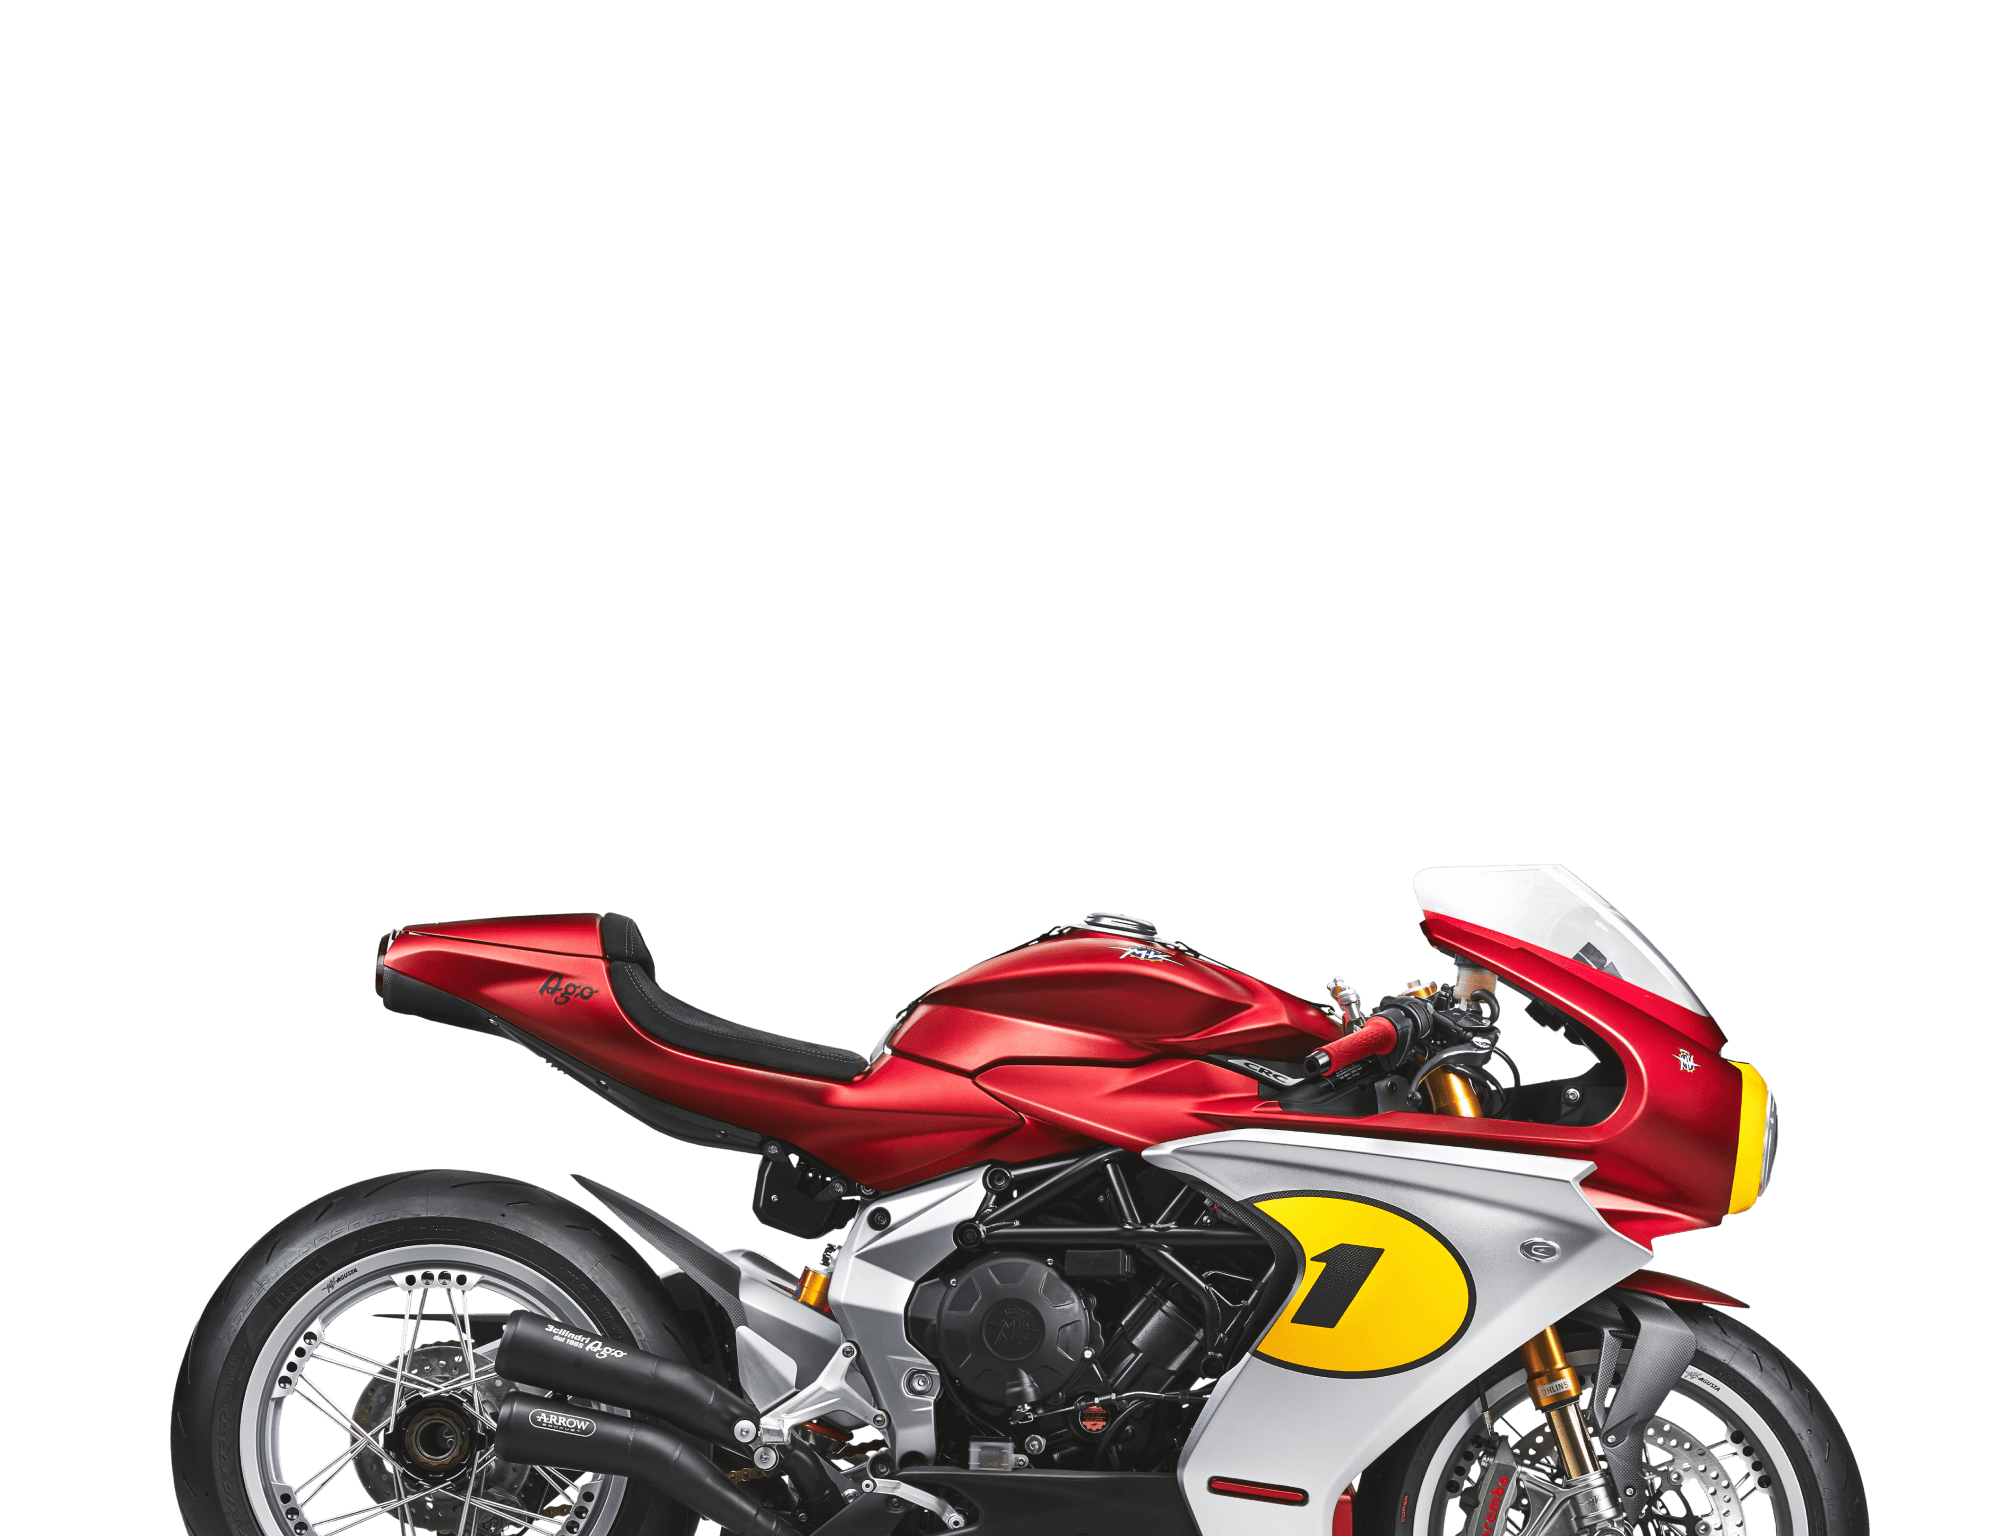 MV Agusta's Special-Edition Superveloce Ago - Motorcycle & Powersports News